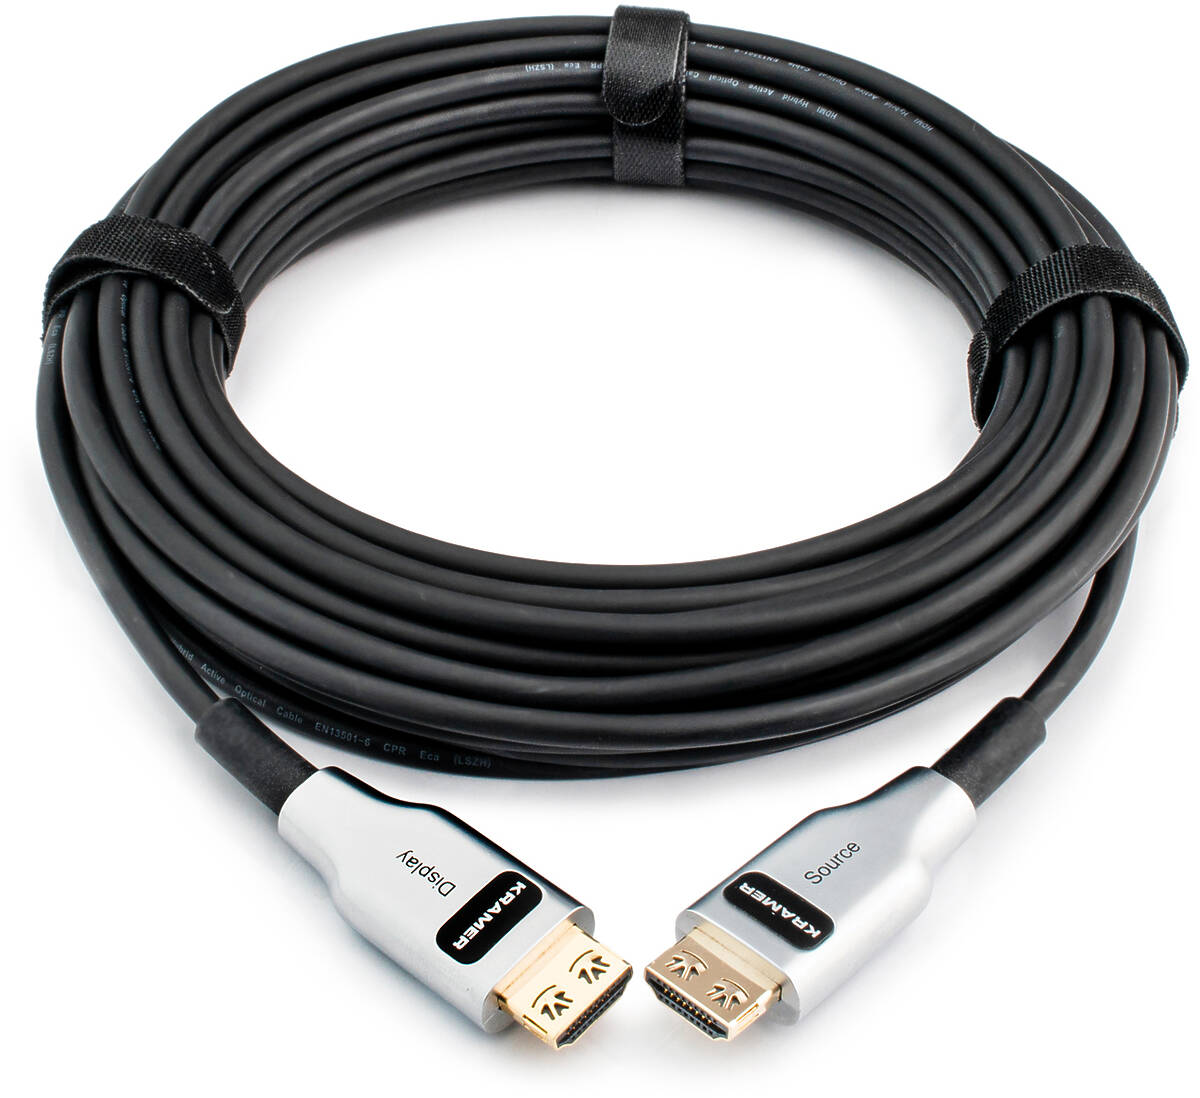 CLS-AOCH/60F-295 90.00m Kramer CLS-AOCH/60F cable product image. Click to enlarge.